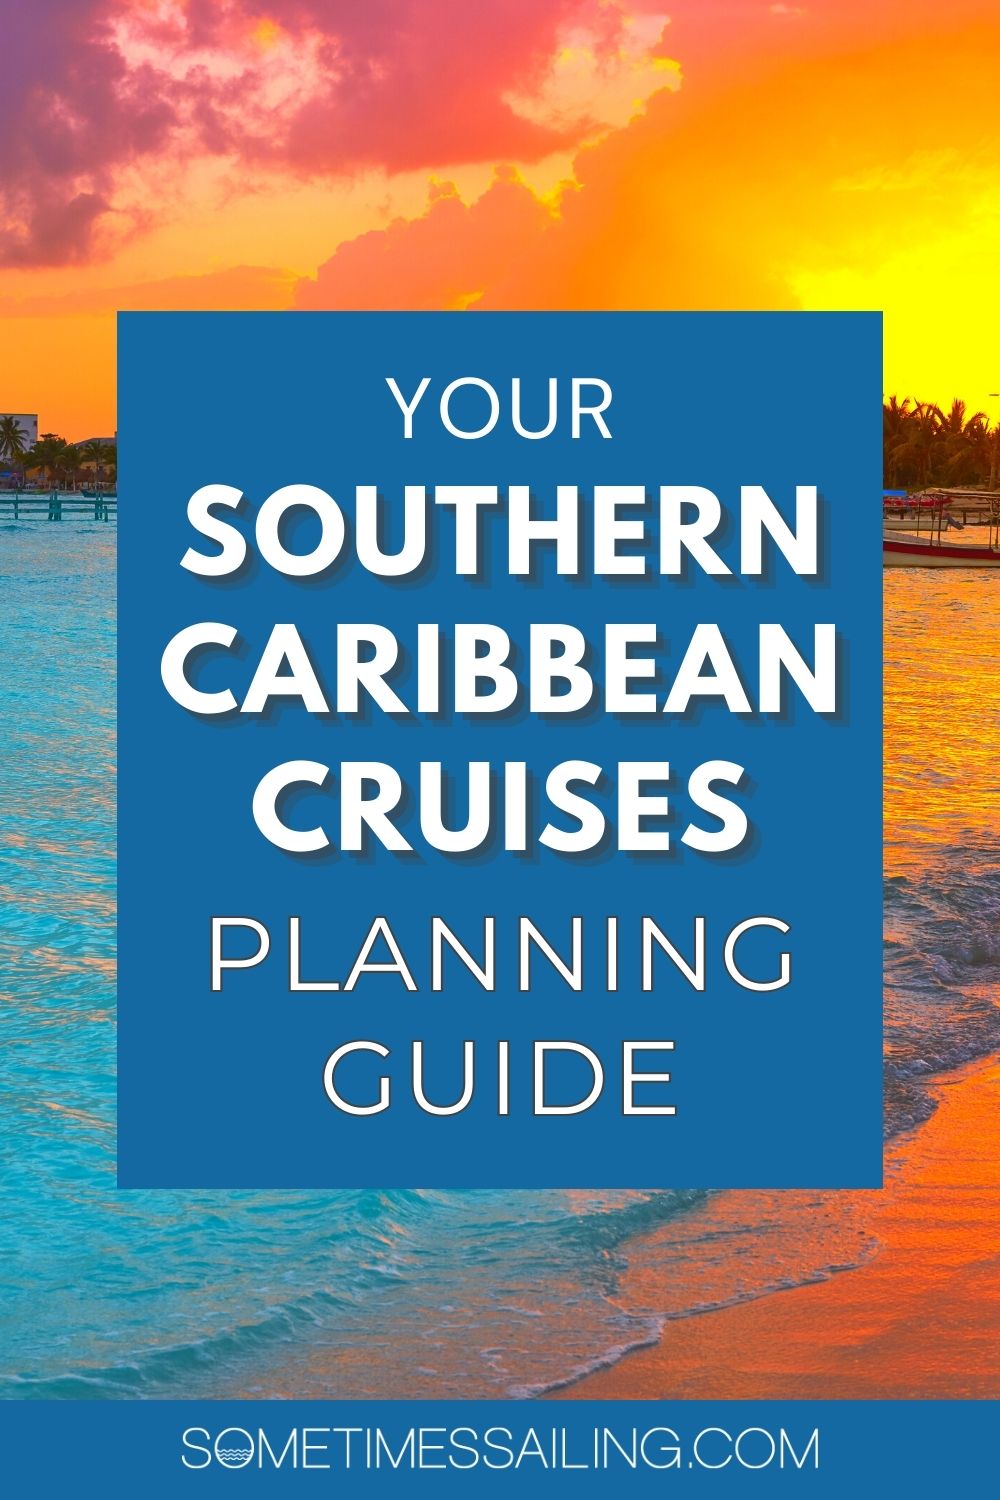 Your Southern Caribbean Cruises Planning Guide with a picture of the sunset over the Caribbean Sea behind hit.